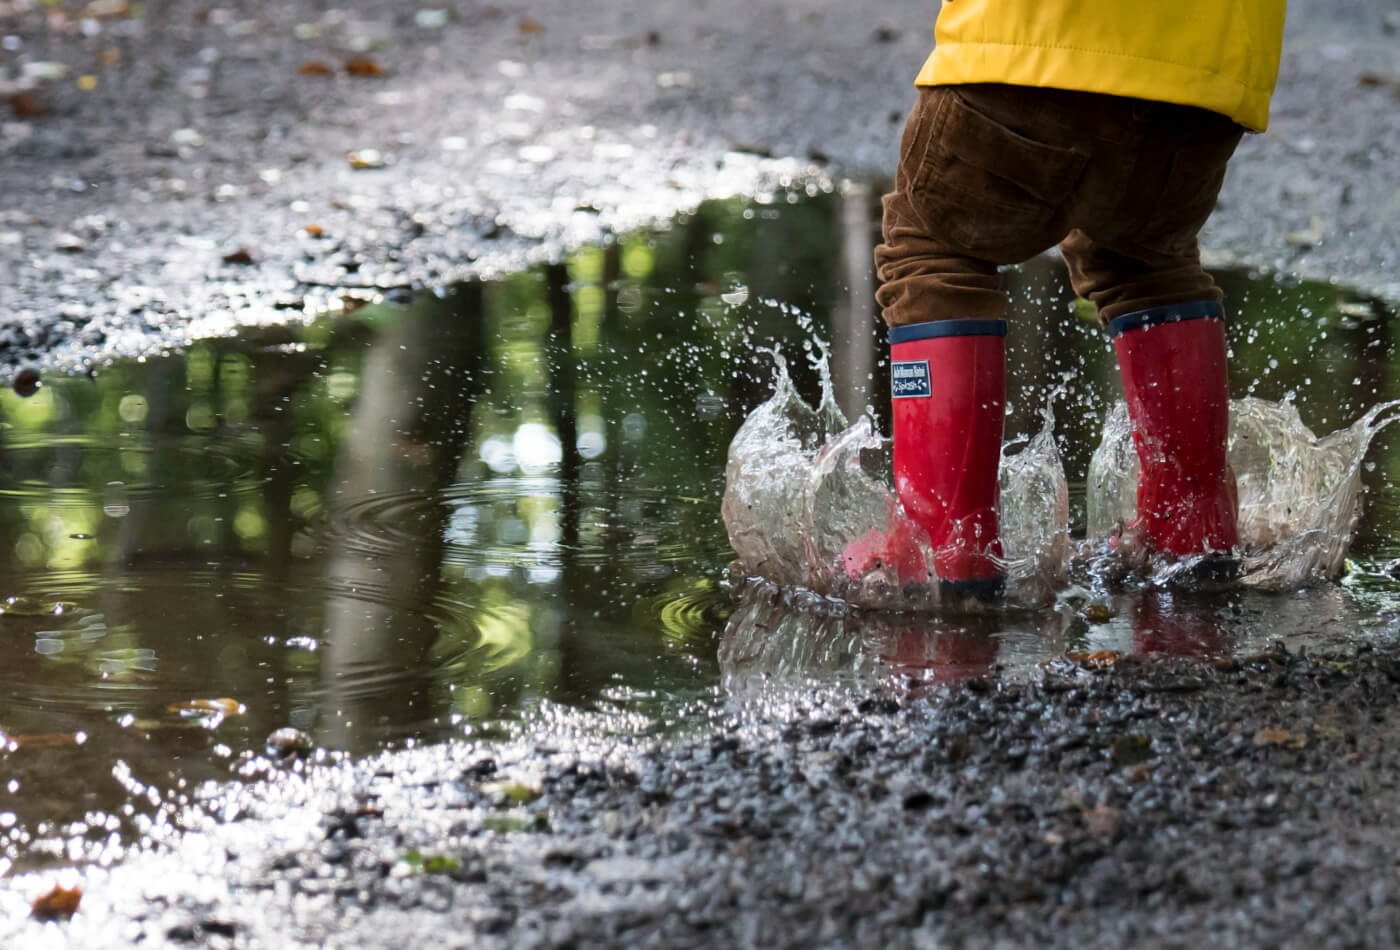 A child wearing red wellington boots and a yellow coat jumping into a puddle